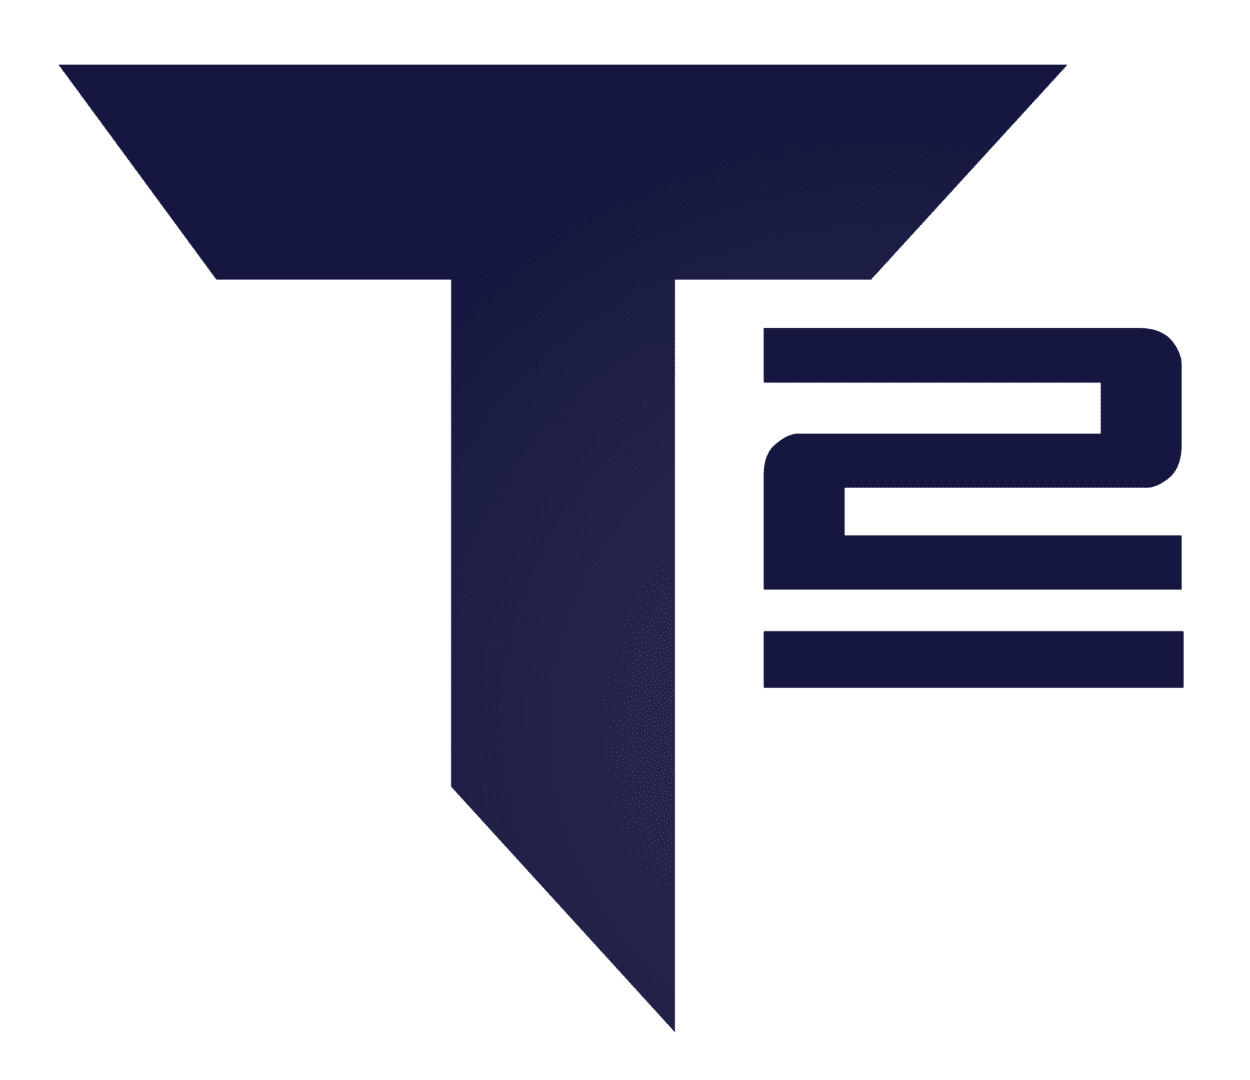 A t 2 logo is shown in black and white.